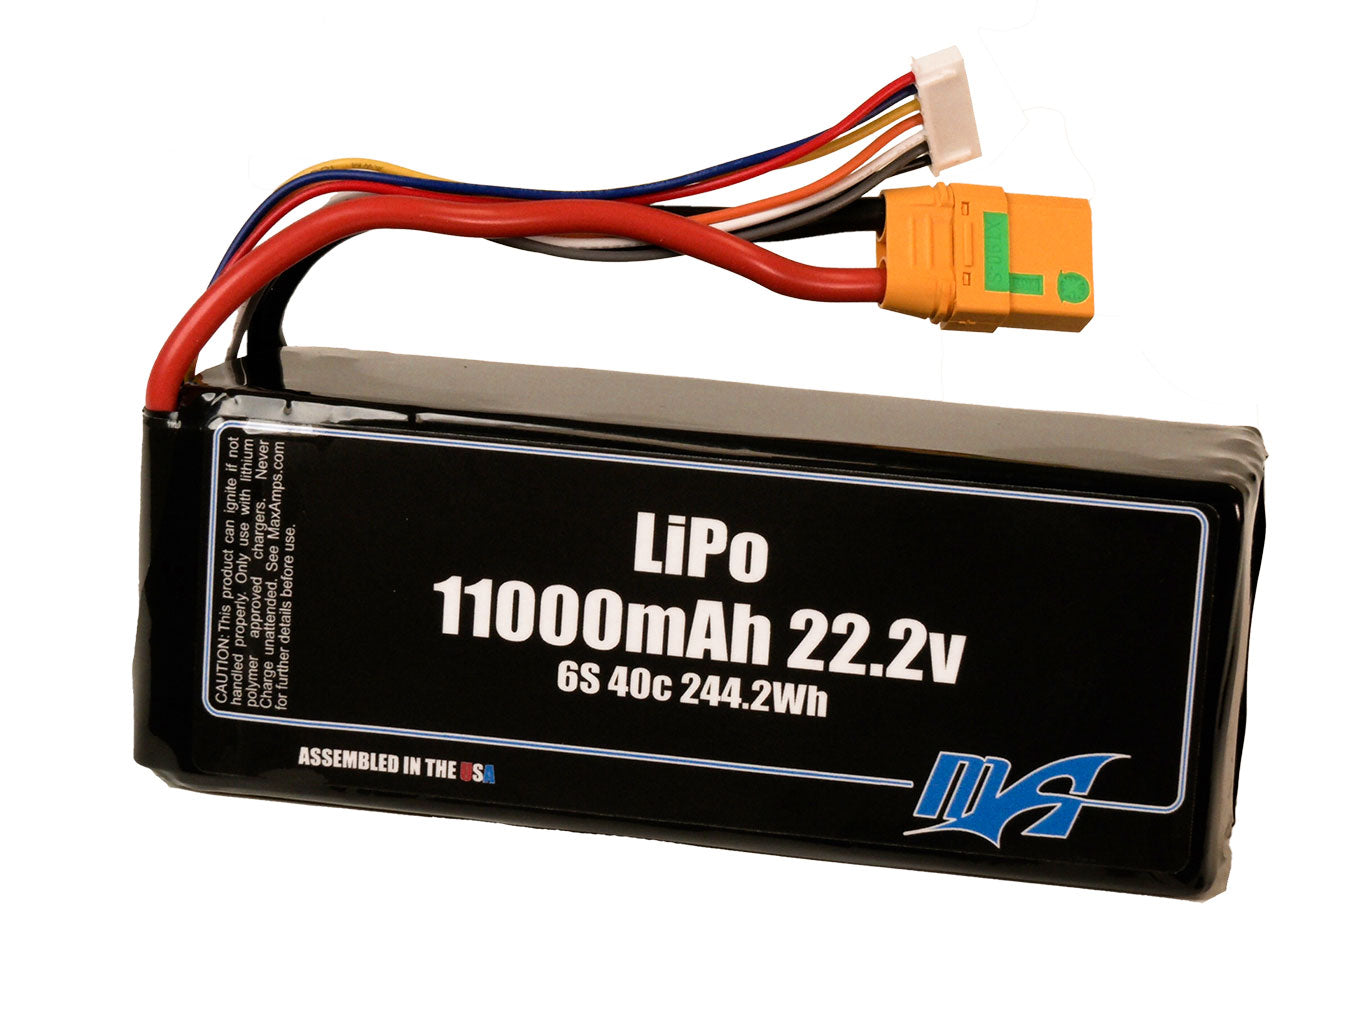 A MaxAmps LiPo 11000mAh 6S 22.2 volt battery pack with XT90 anti spark connector